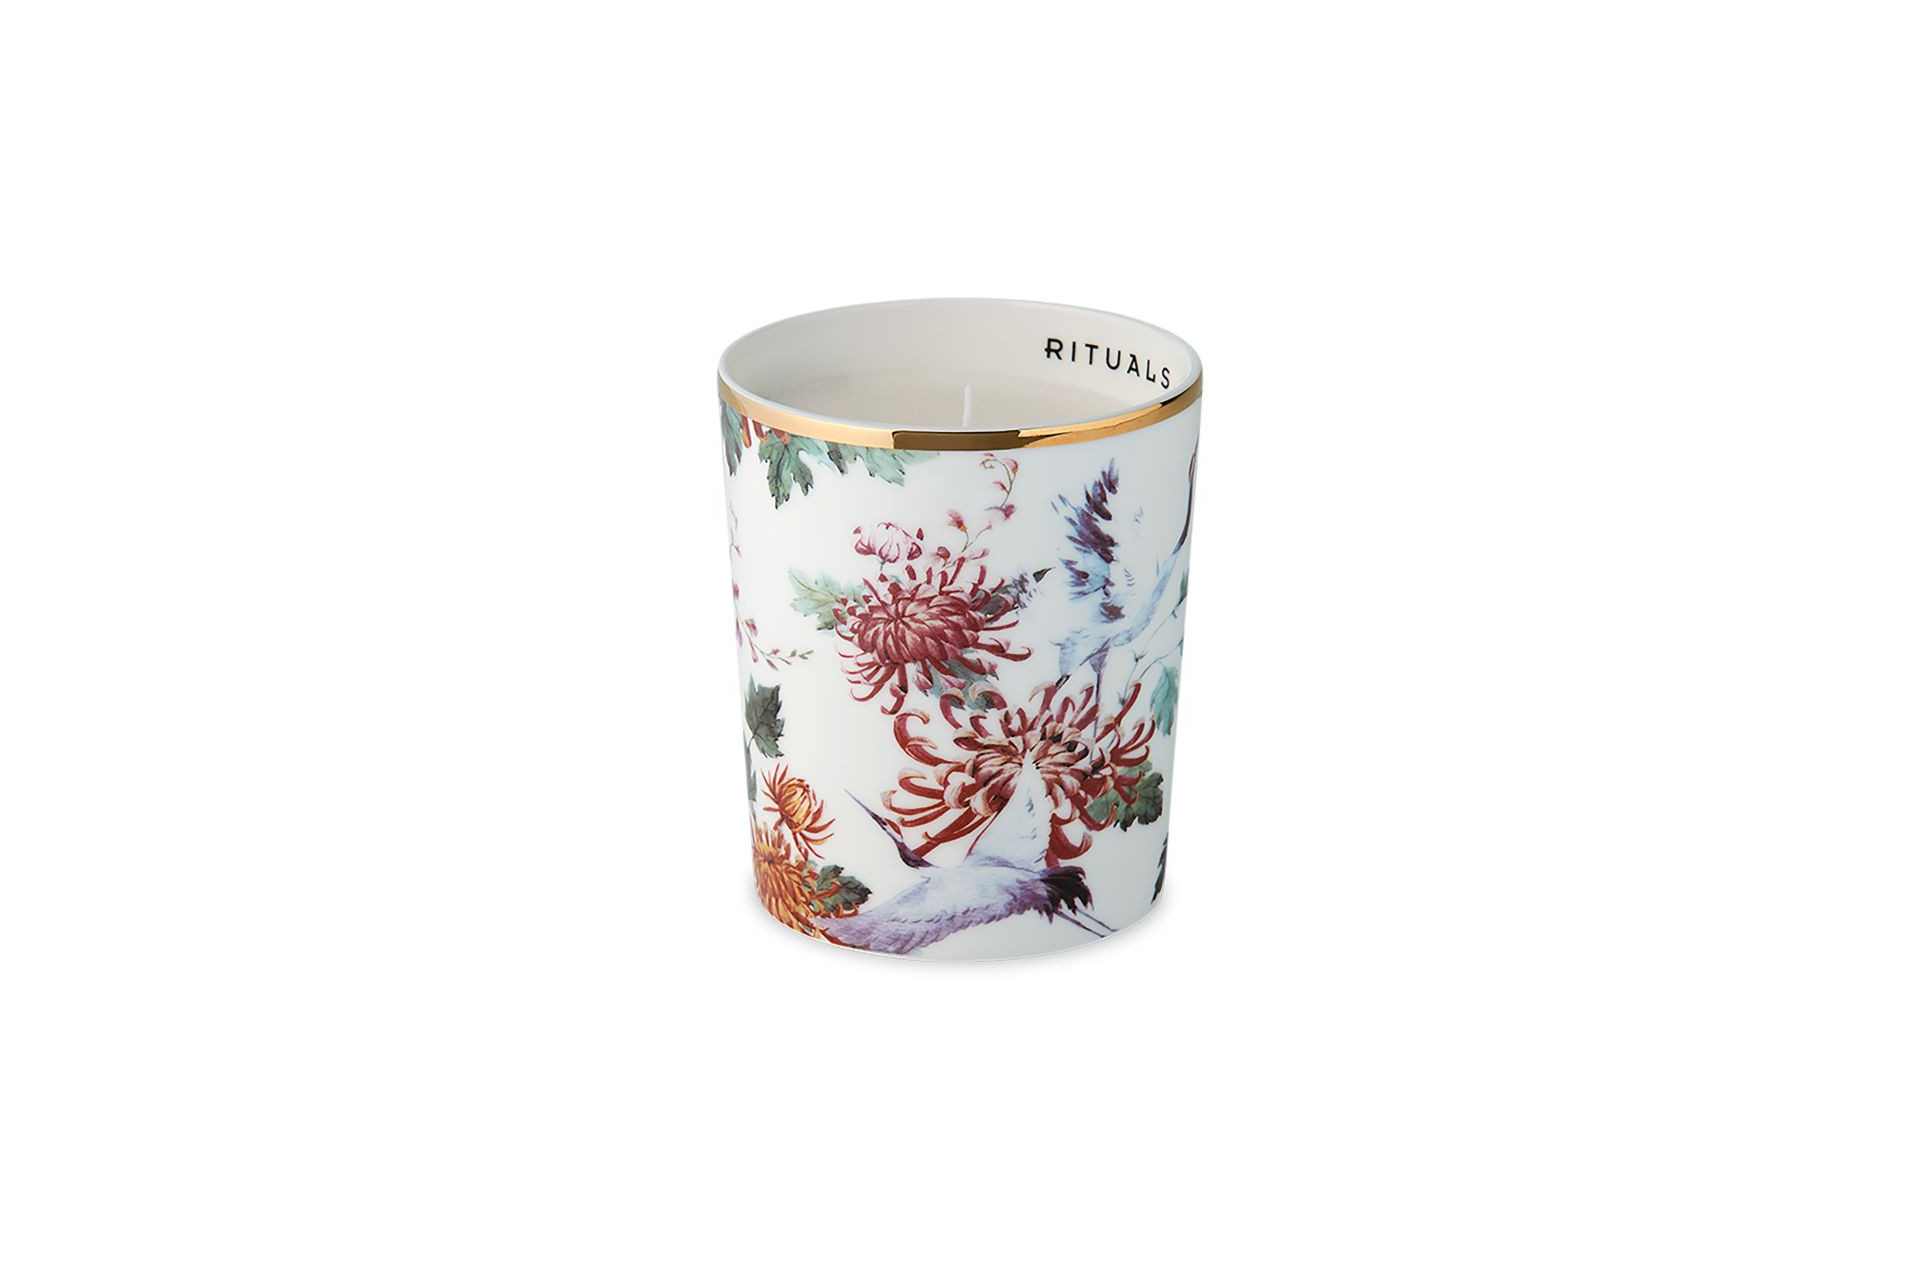 Acheter Rituals Luxury Candle Holder - Tropical Cranes